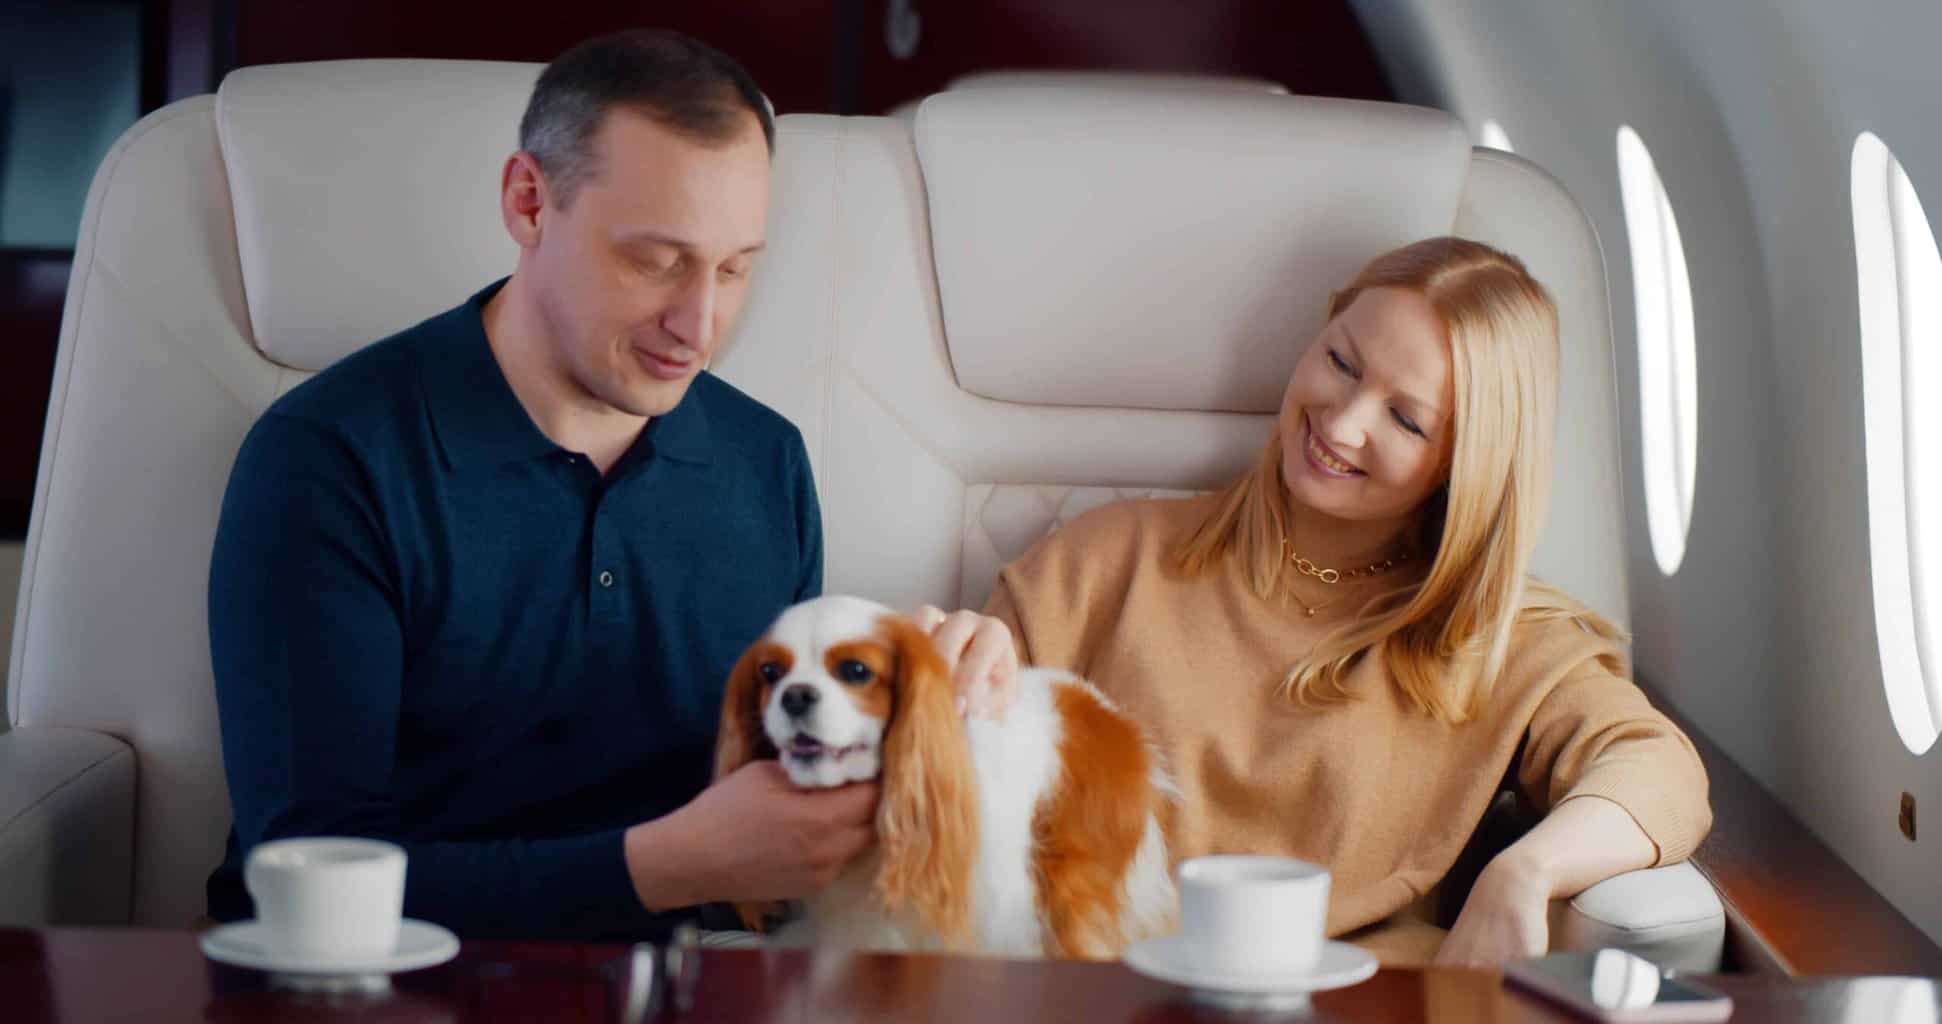 Couple travel on private jet with cavalier king charles spaniel. When you plan a luxury holiday, choose a dog-friendly location, pack extra food and take a blanket to keep your furry friend warm.